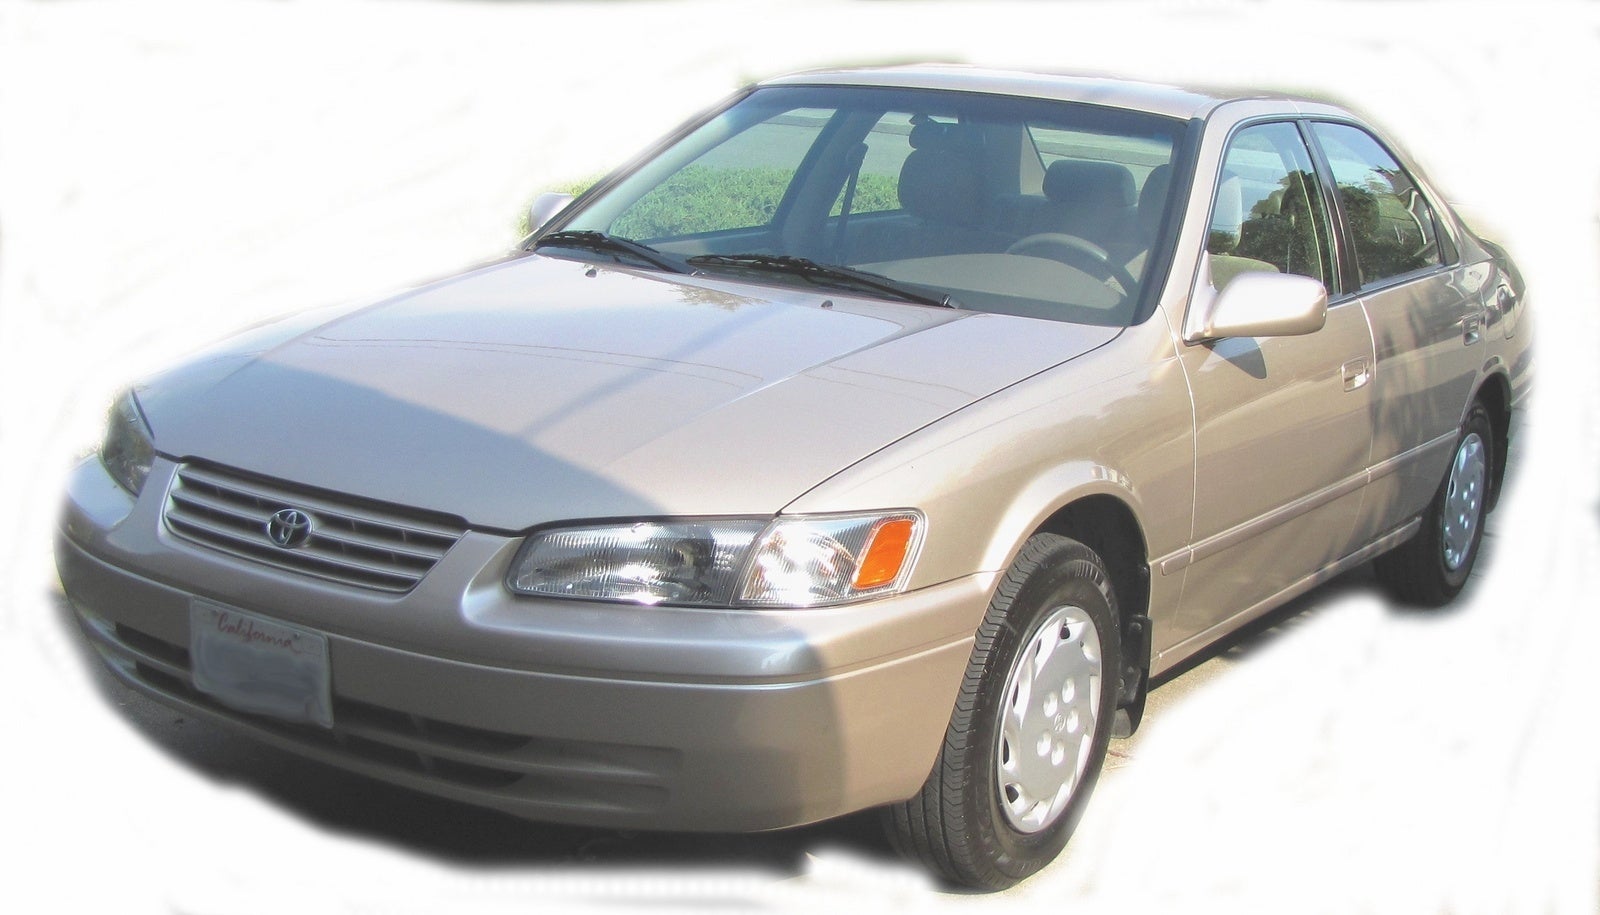 Toyota Camry Questions - 1998 Toyota Camry LE 4 Cyl Sedan 37,000 miles